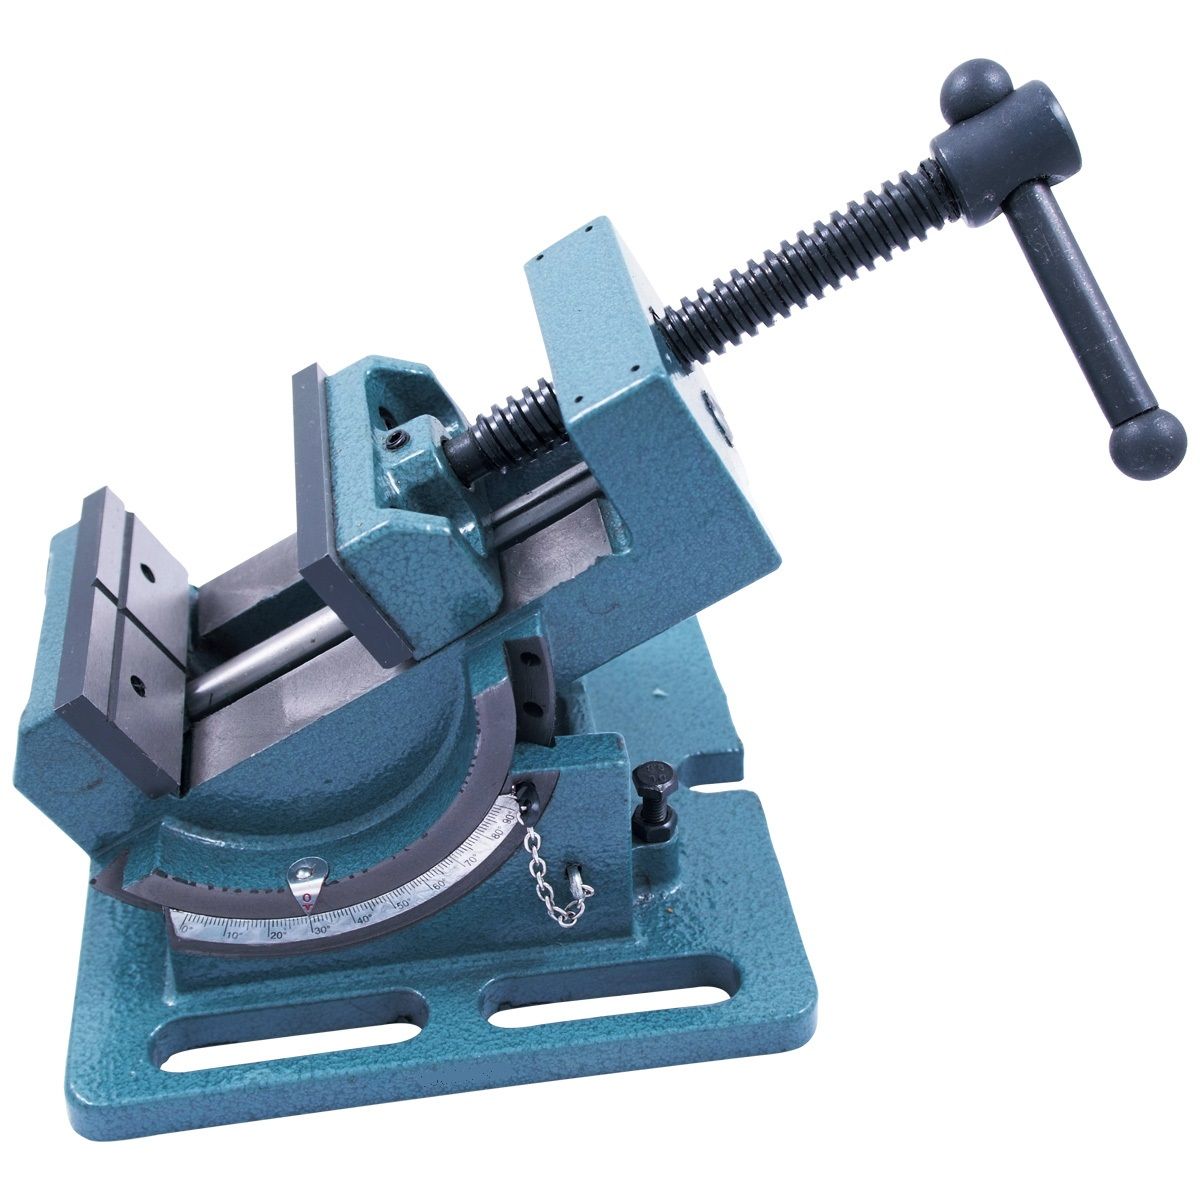 4" DELUXE TILTING ANGLE VISE (3900-2684)